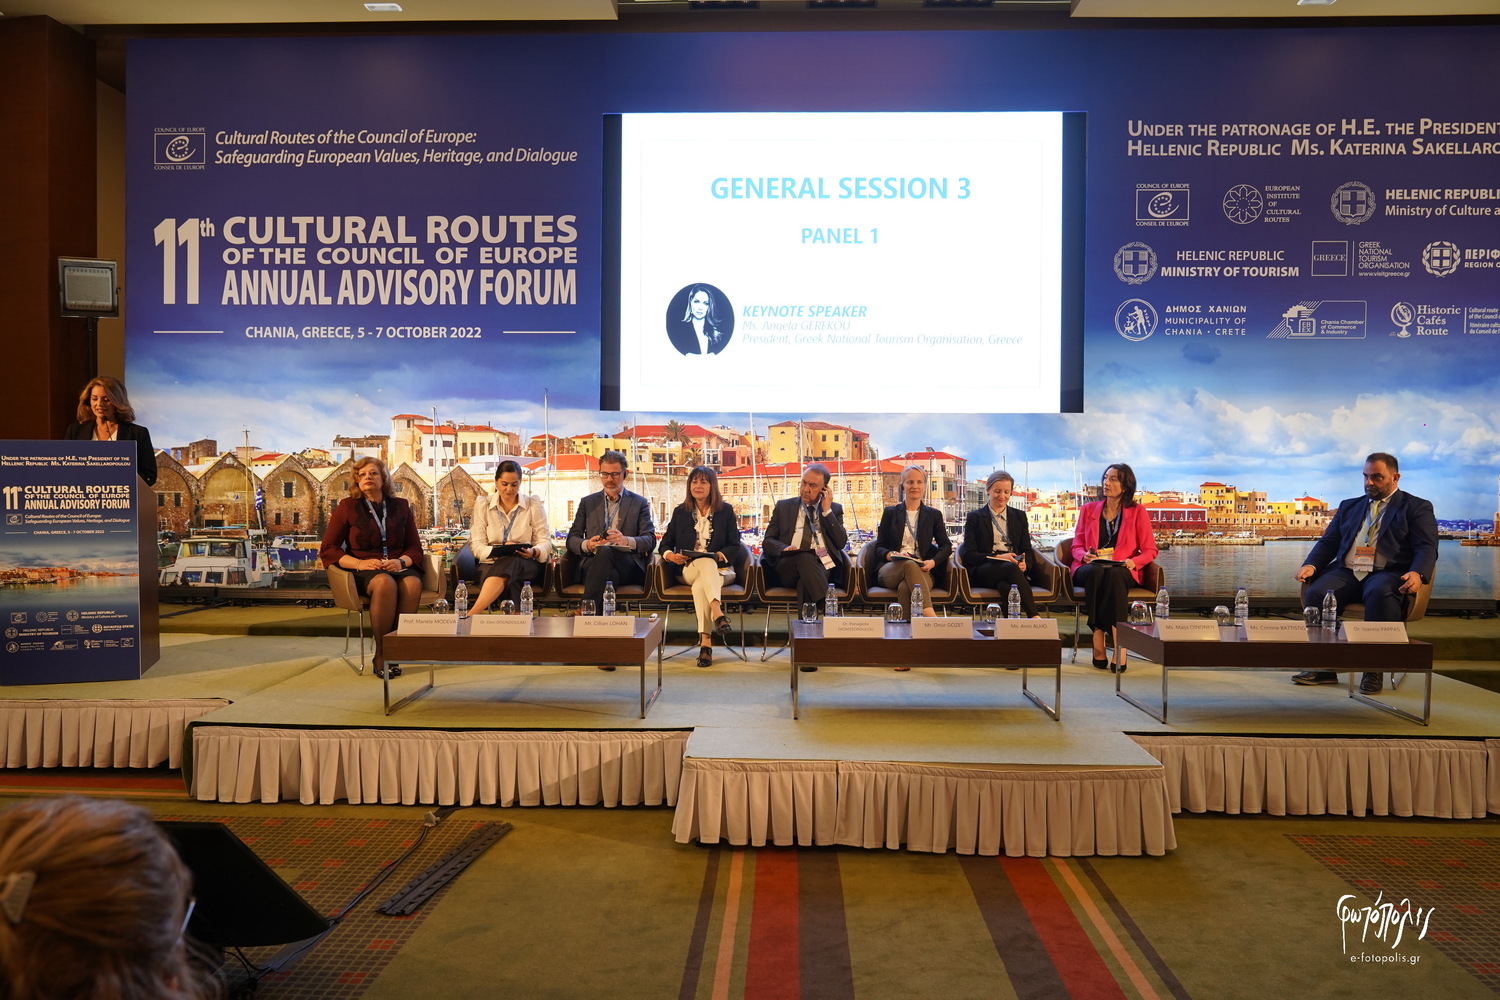 General Session 3 panel 1: Fostering creative industries, cultural tourism, innovative technologies for sustainable communities